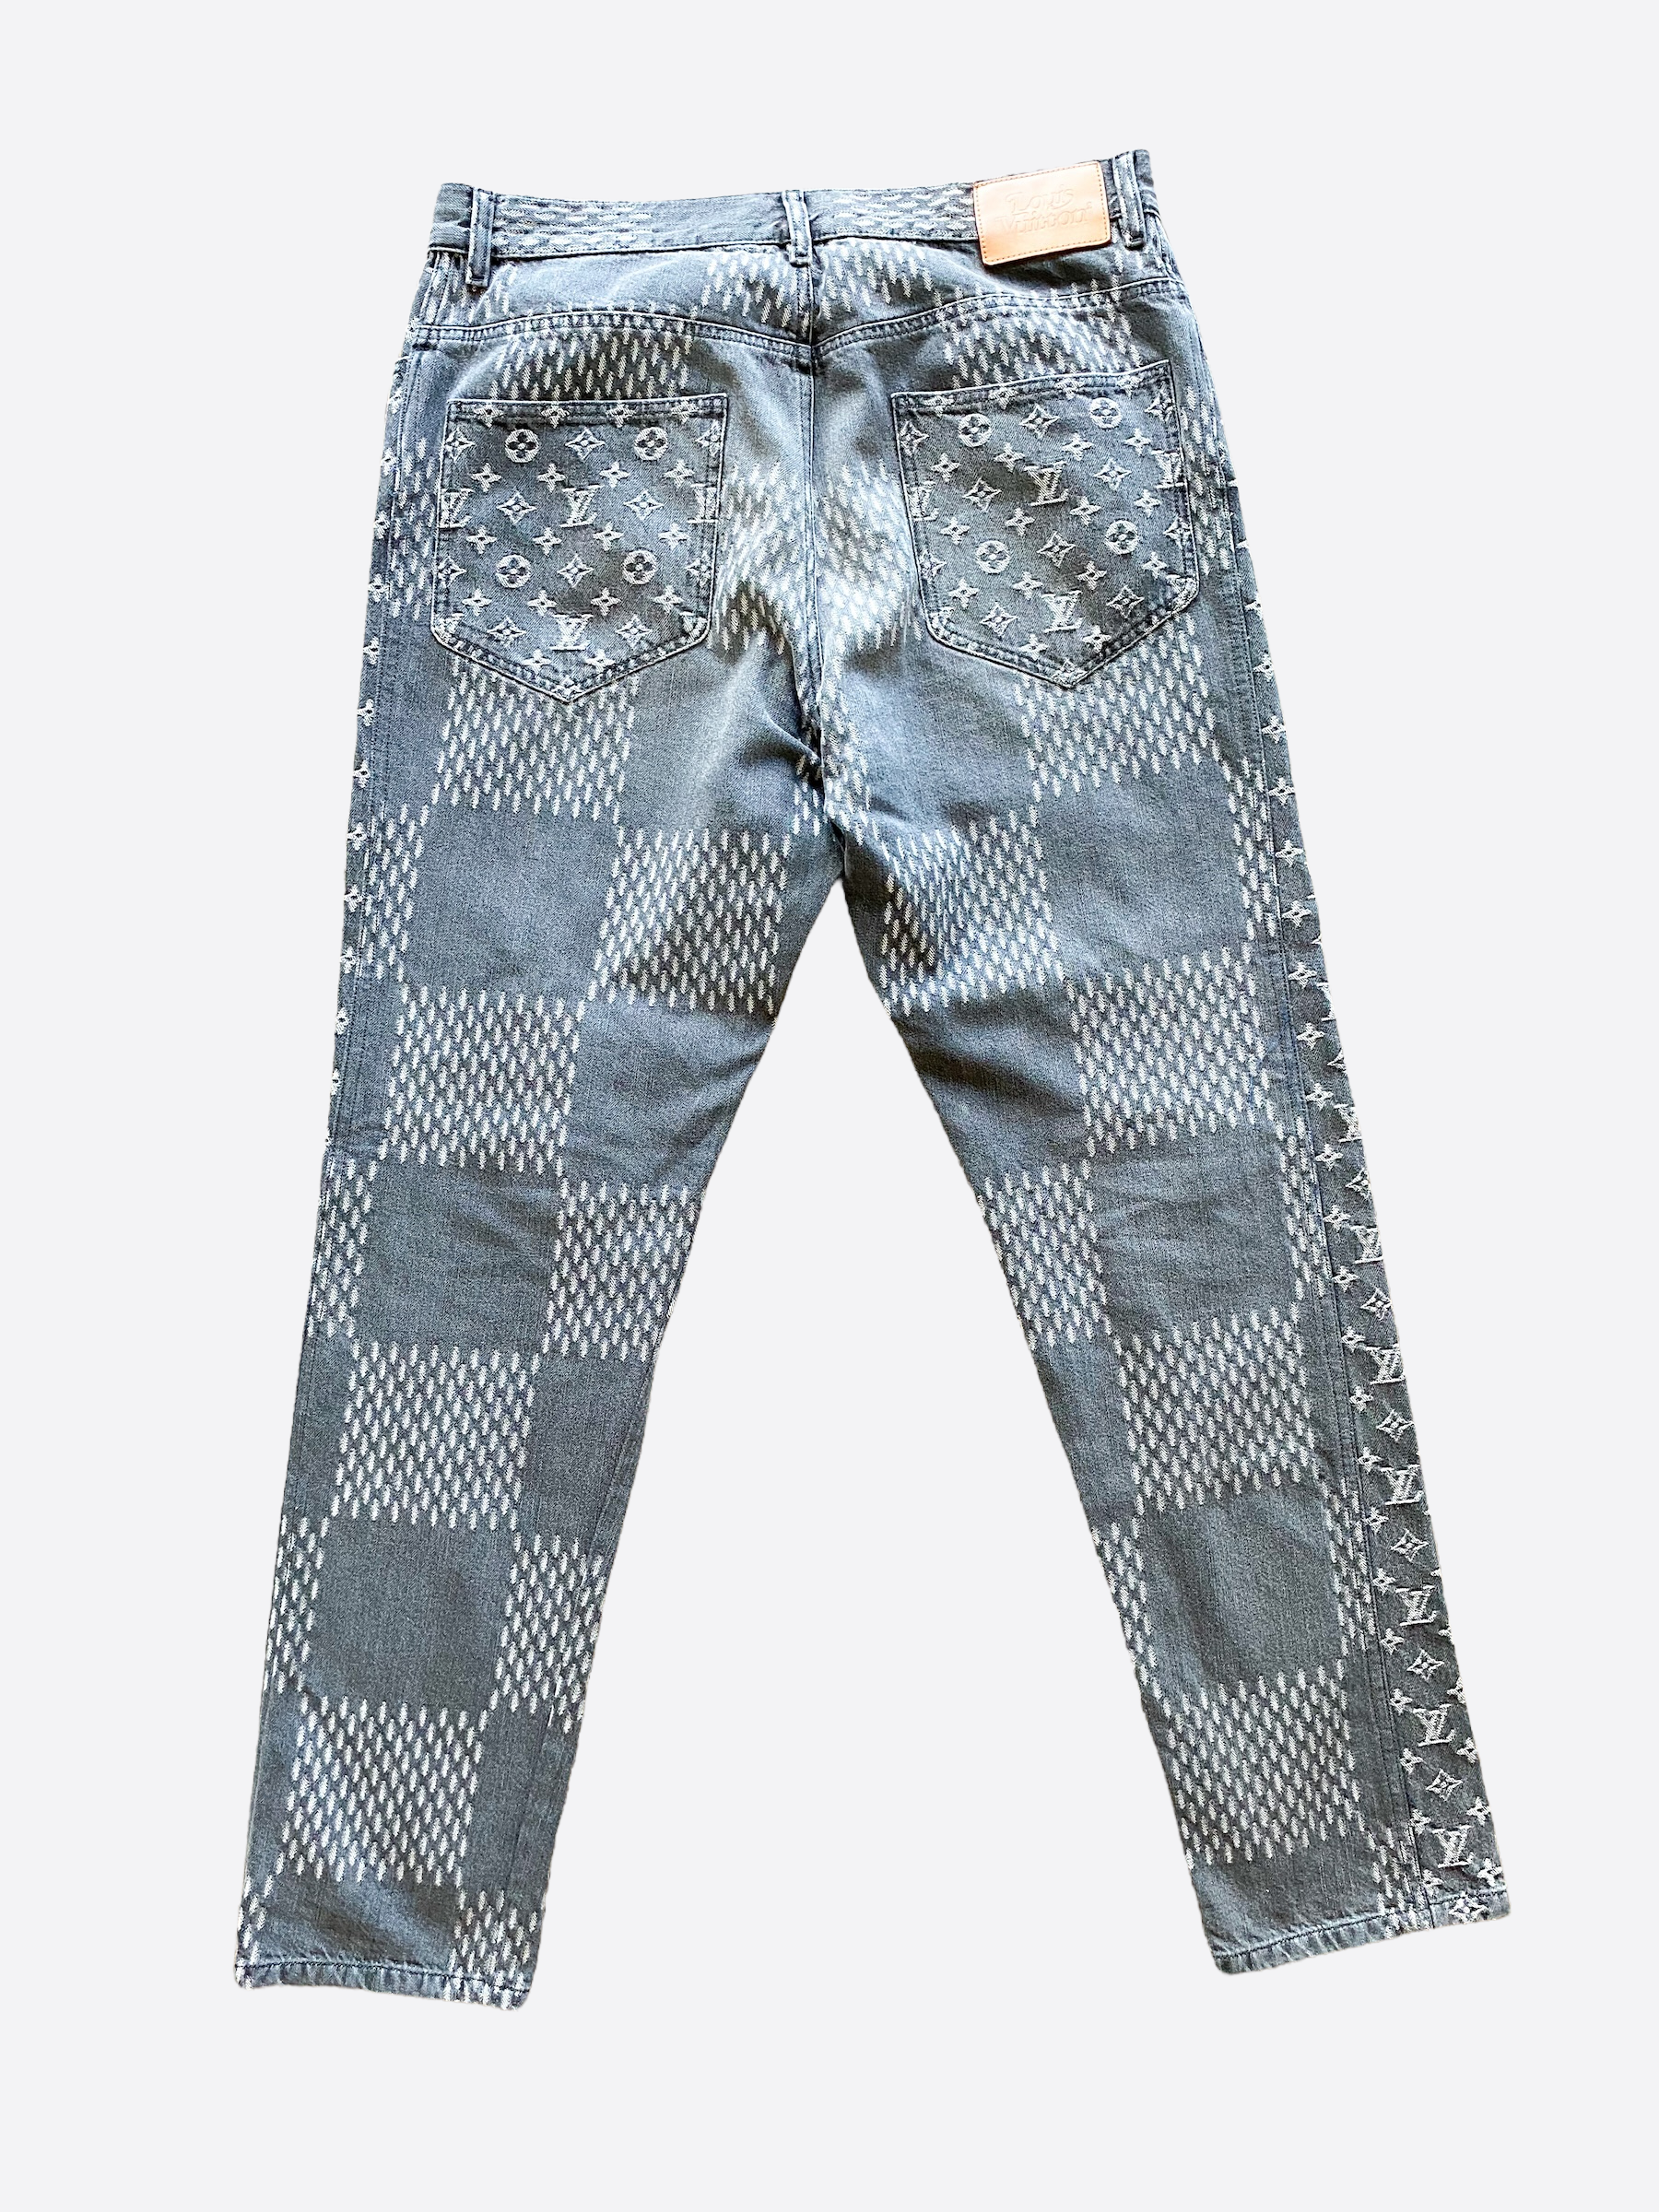 Louis Vuitton Monogram Slim Jeans  Size 36 Available For Immediate Sale At  Sothebys